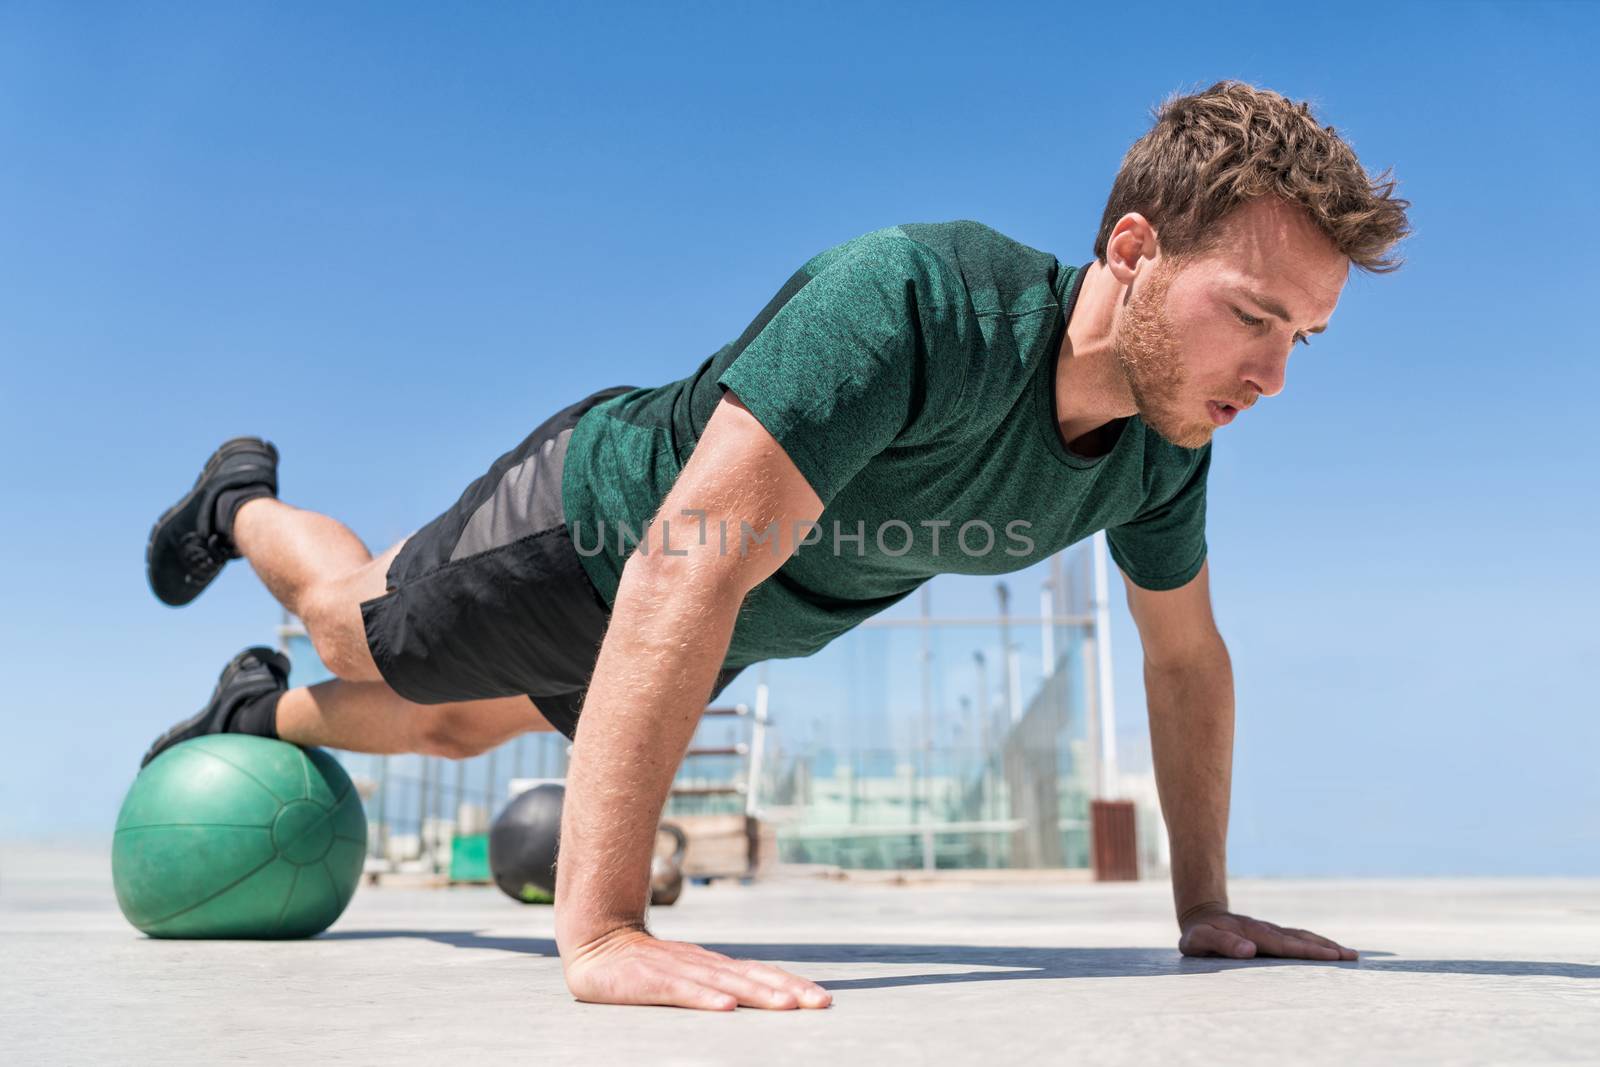 Man working out strength training doing incline push-ups workout at outdoor gym balancing on stability medicine ball with one leg raised. Bodyweight pushups exercises. Push-up variation.